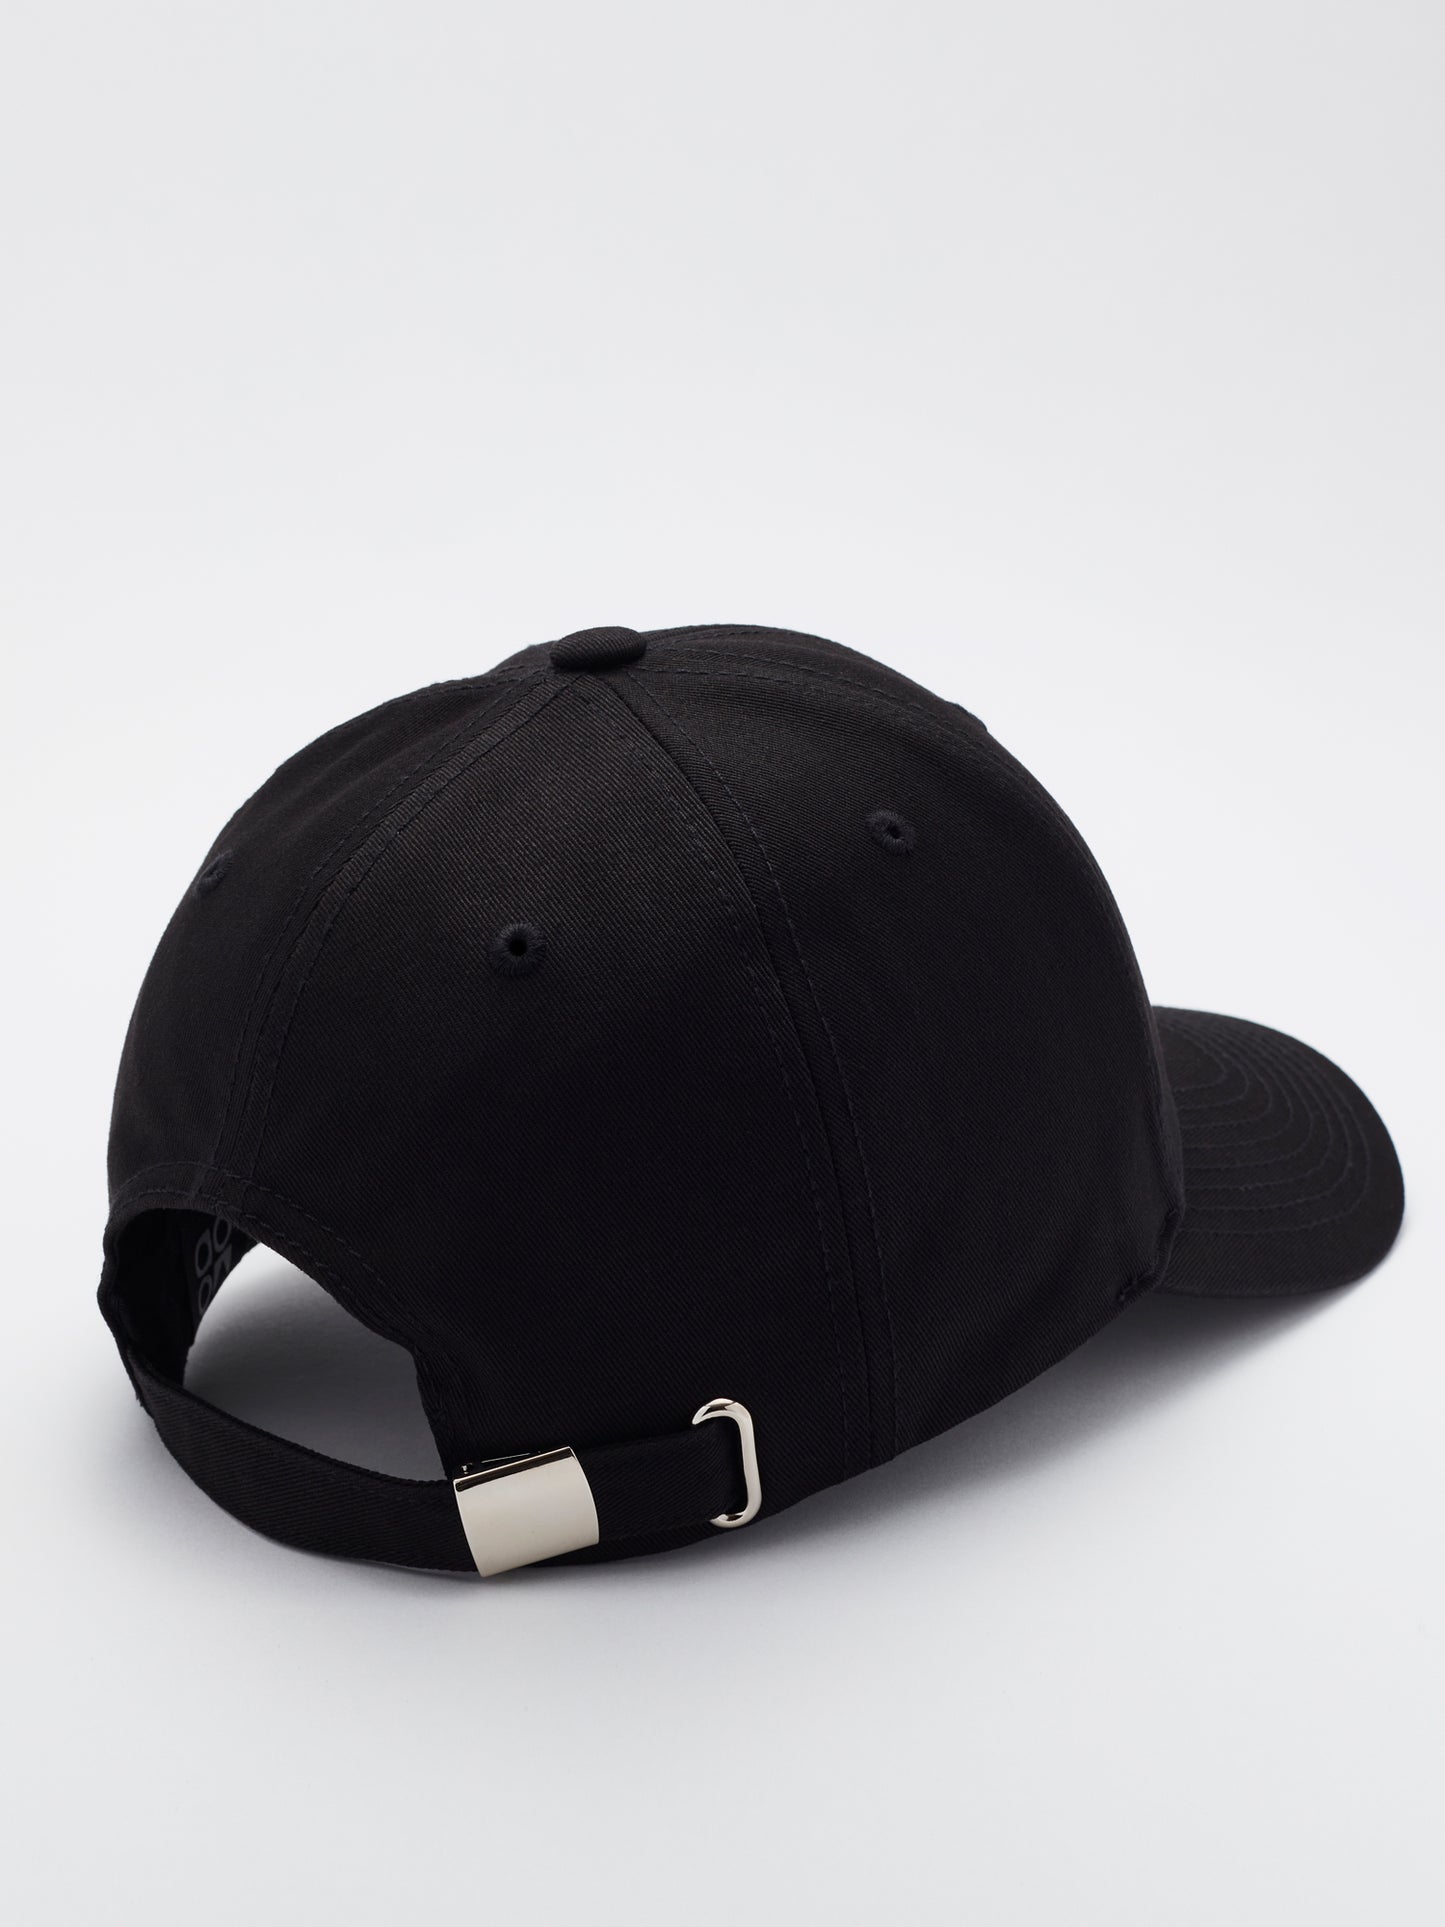 Load image into Gallery viewer, MOOD Shroom baseball cap in black - Back view
